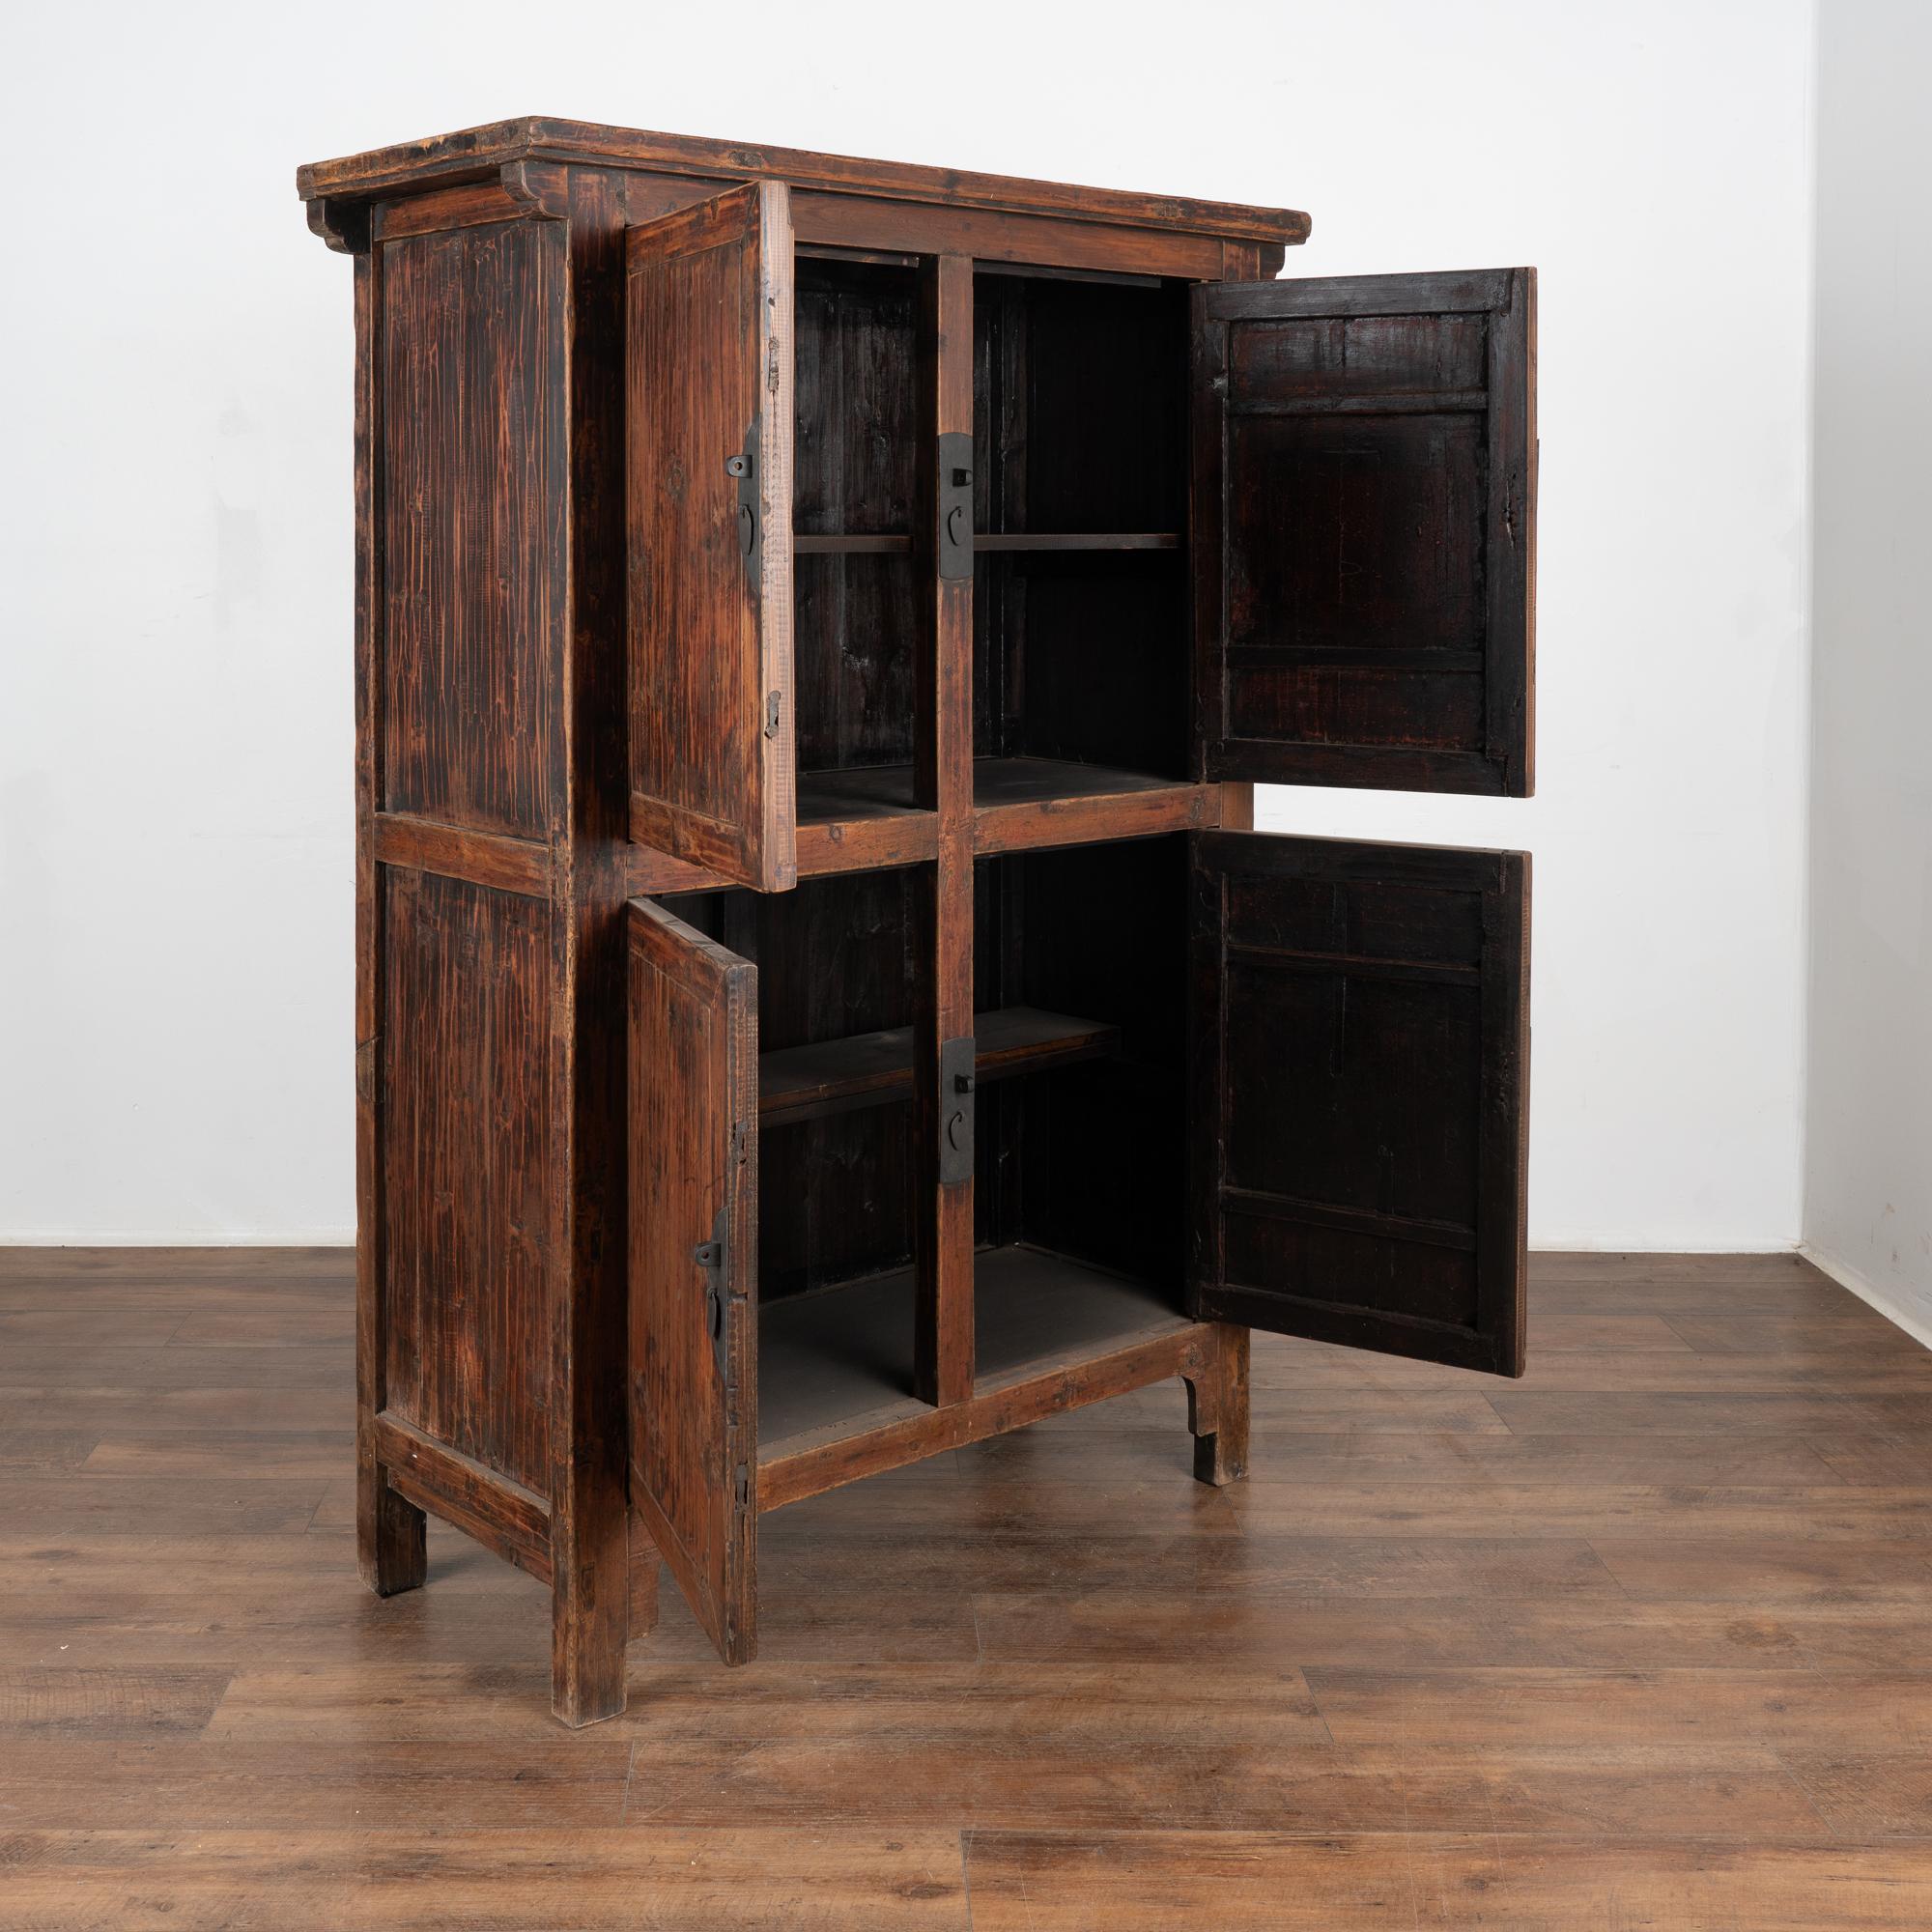 Chinese Export Chinese Cabinet Armoire, circa 1860-80 For Sale